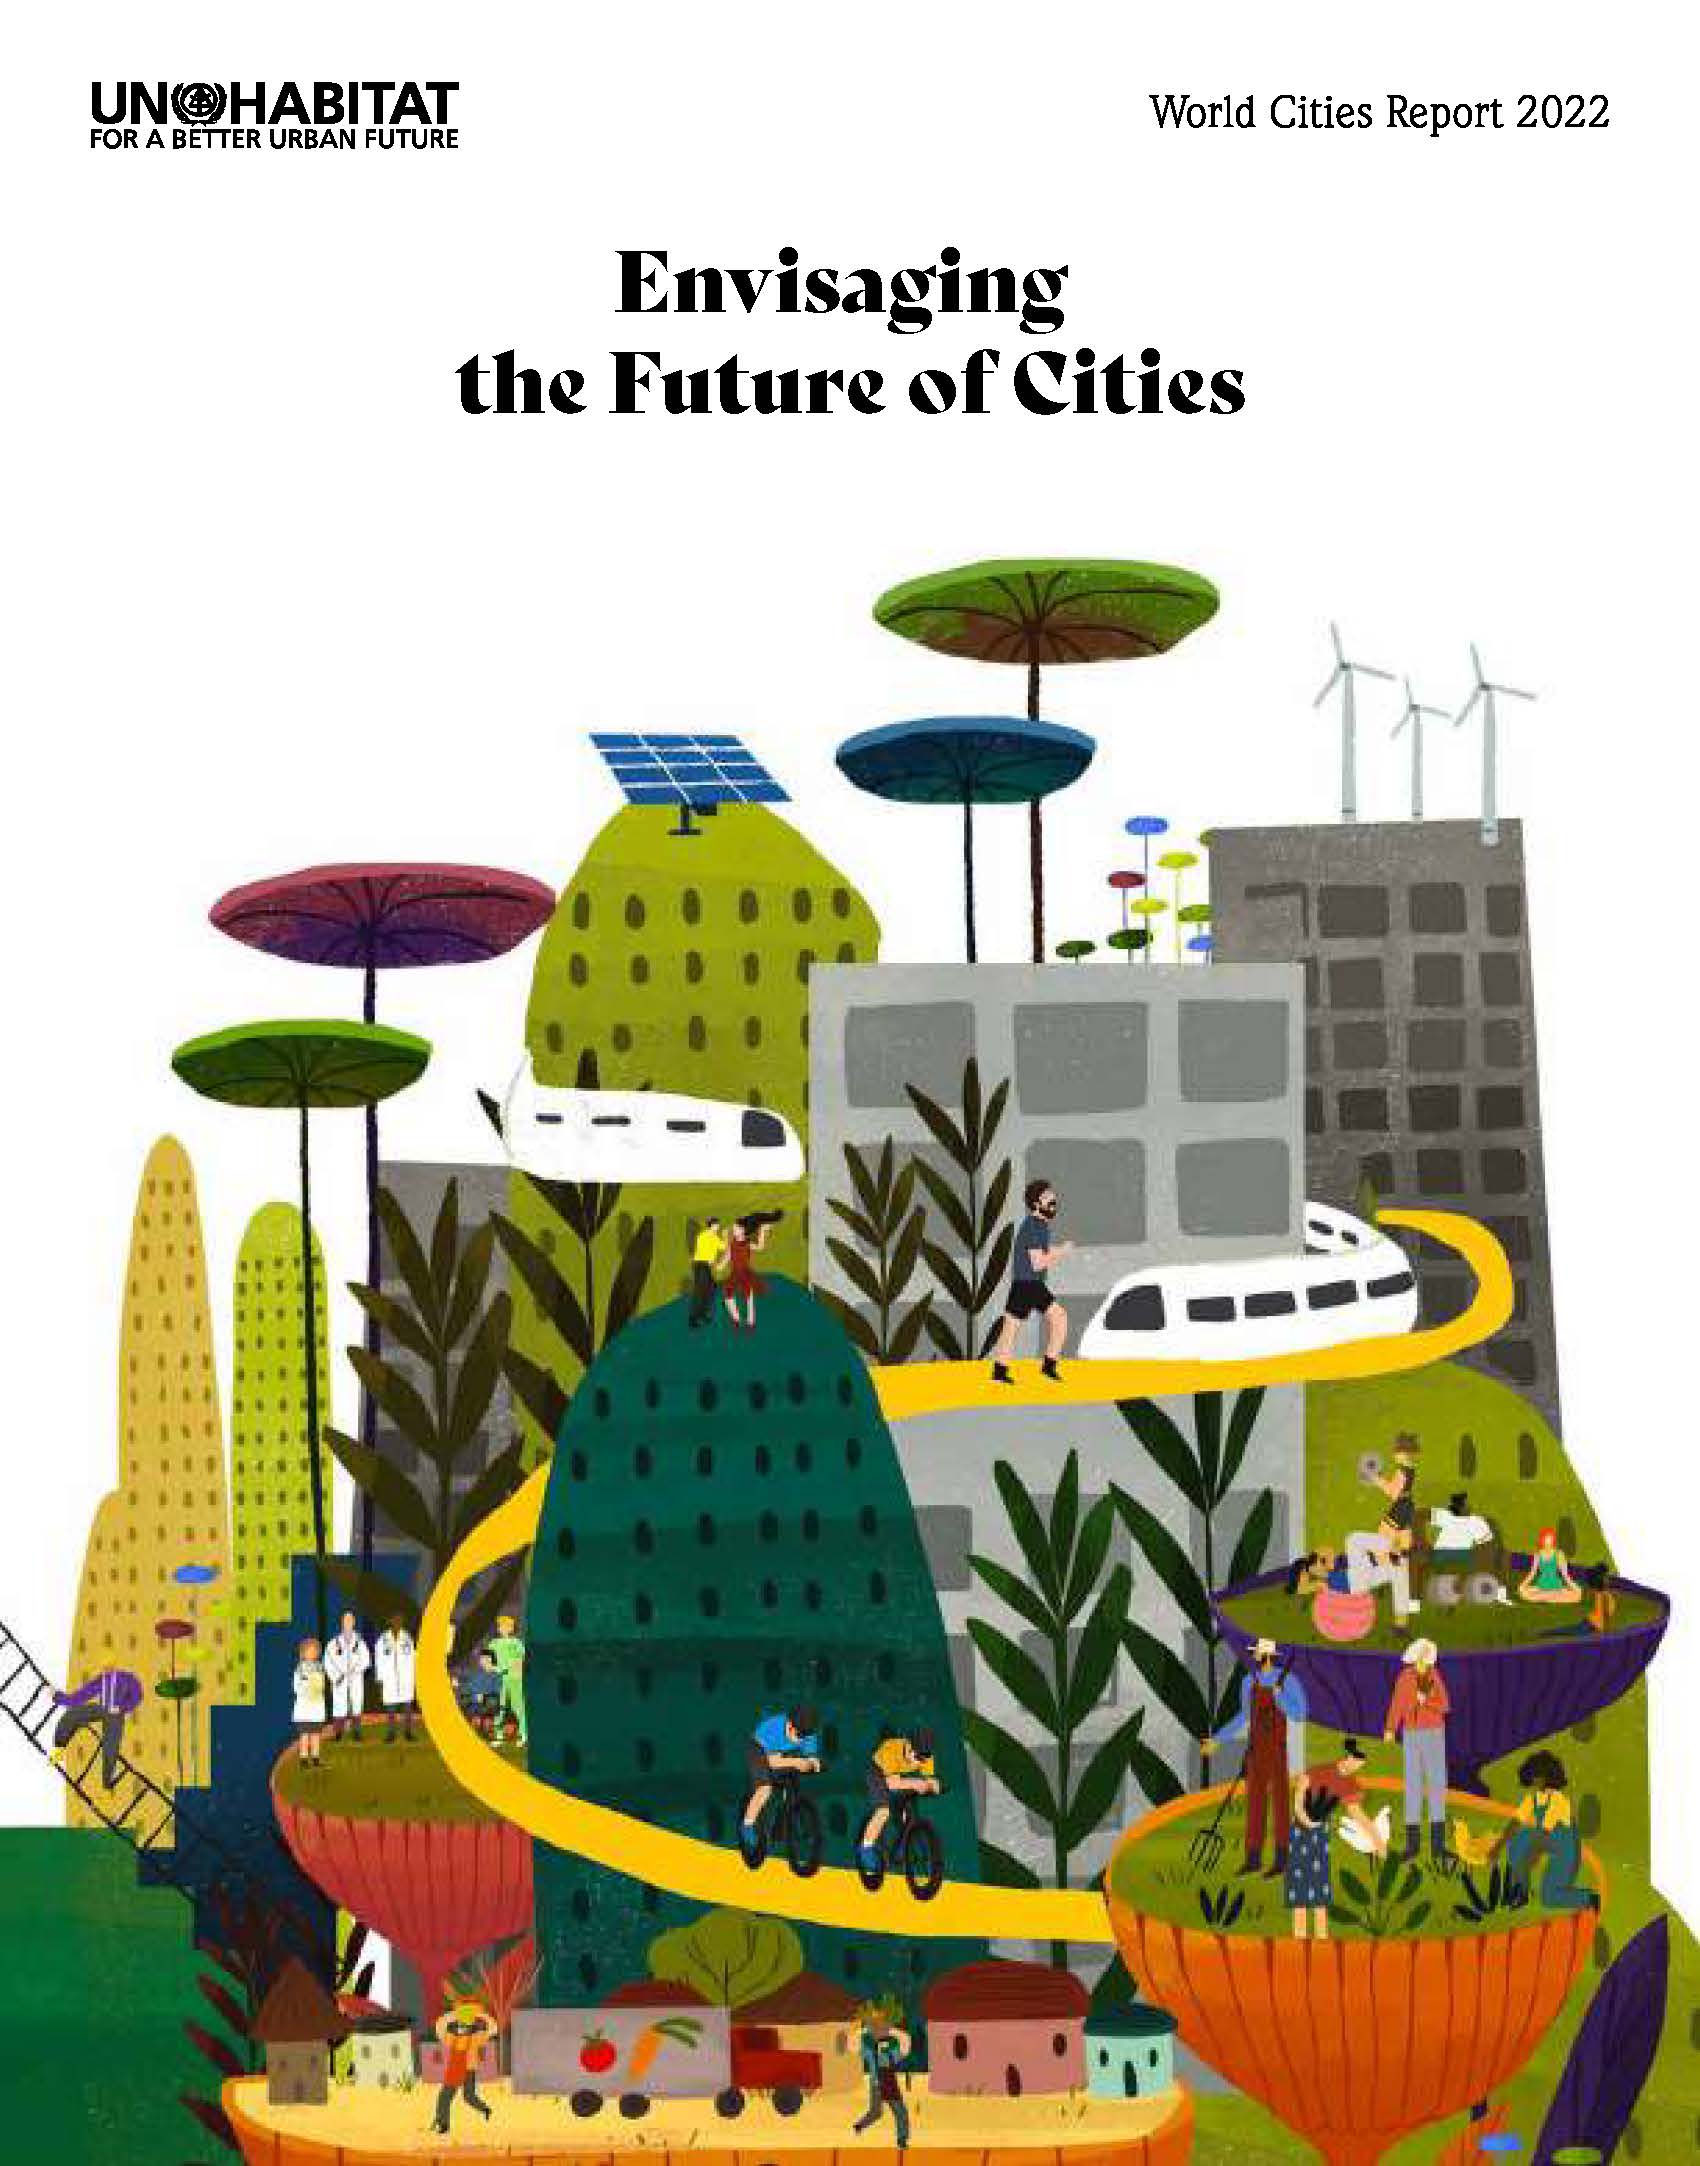 United Nations Centre for Human Settlements  - <blockquote>World Cities Report 2022:&nbsp;<em>Envisaging the Future of Cities</em>&nbsp;seeks to provide greater clarity and insights into the future of cities based on existing trends, challenges and opportunities, as well as disruptive conditions, including the valuable lessons from the COVID-19 pandemic, and suggest ways that cities can be better prepared to address a wide range of shocks and transition to sustainable urban futures. The Report proposes a state of informed preparedness that provides us with the opportunity to anticipate change, correct the course of action and become more knowledgeable of the different scenarios or possibilities that the future of cities offers.</blockquote><p><br></p><p>United Nations Human Settlements Programme (UN-Habitat). 2022. “Envisioning Future Cities: World Cities Report 2022.” United Nations. https://unhabitat.org/wcr/.</p>